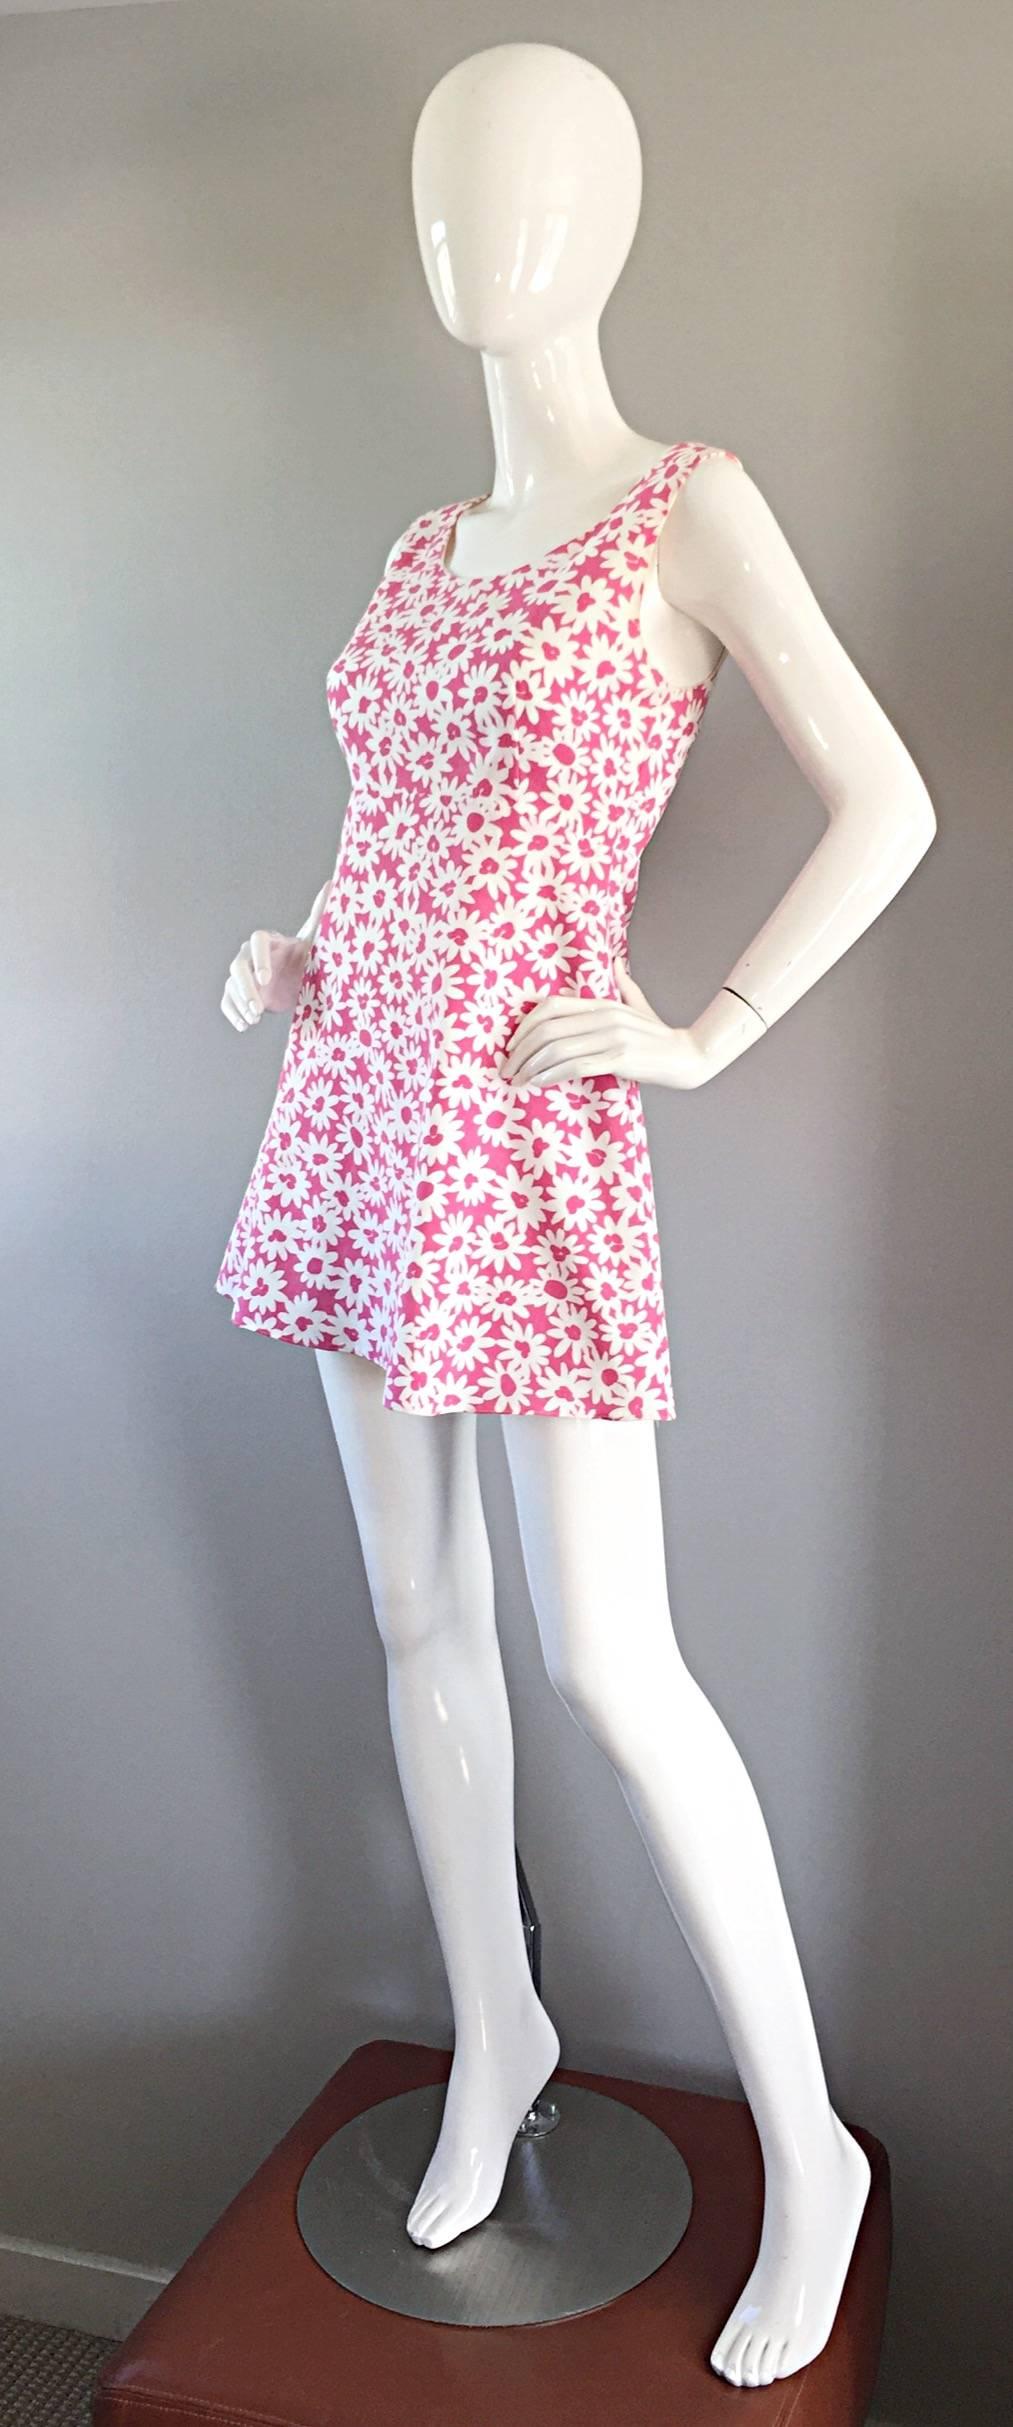 Adorable 1990s Jill Stuart Pink + White Daisy Print A - Line 90s Babydoll Dress  In Excellent Condition For Sale In San Diego, CA